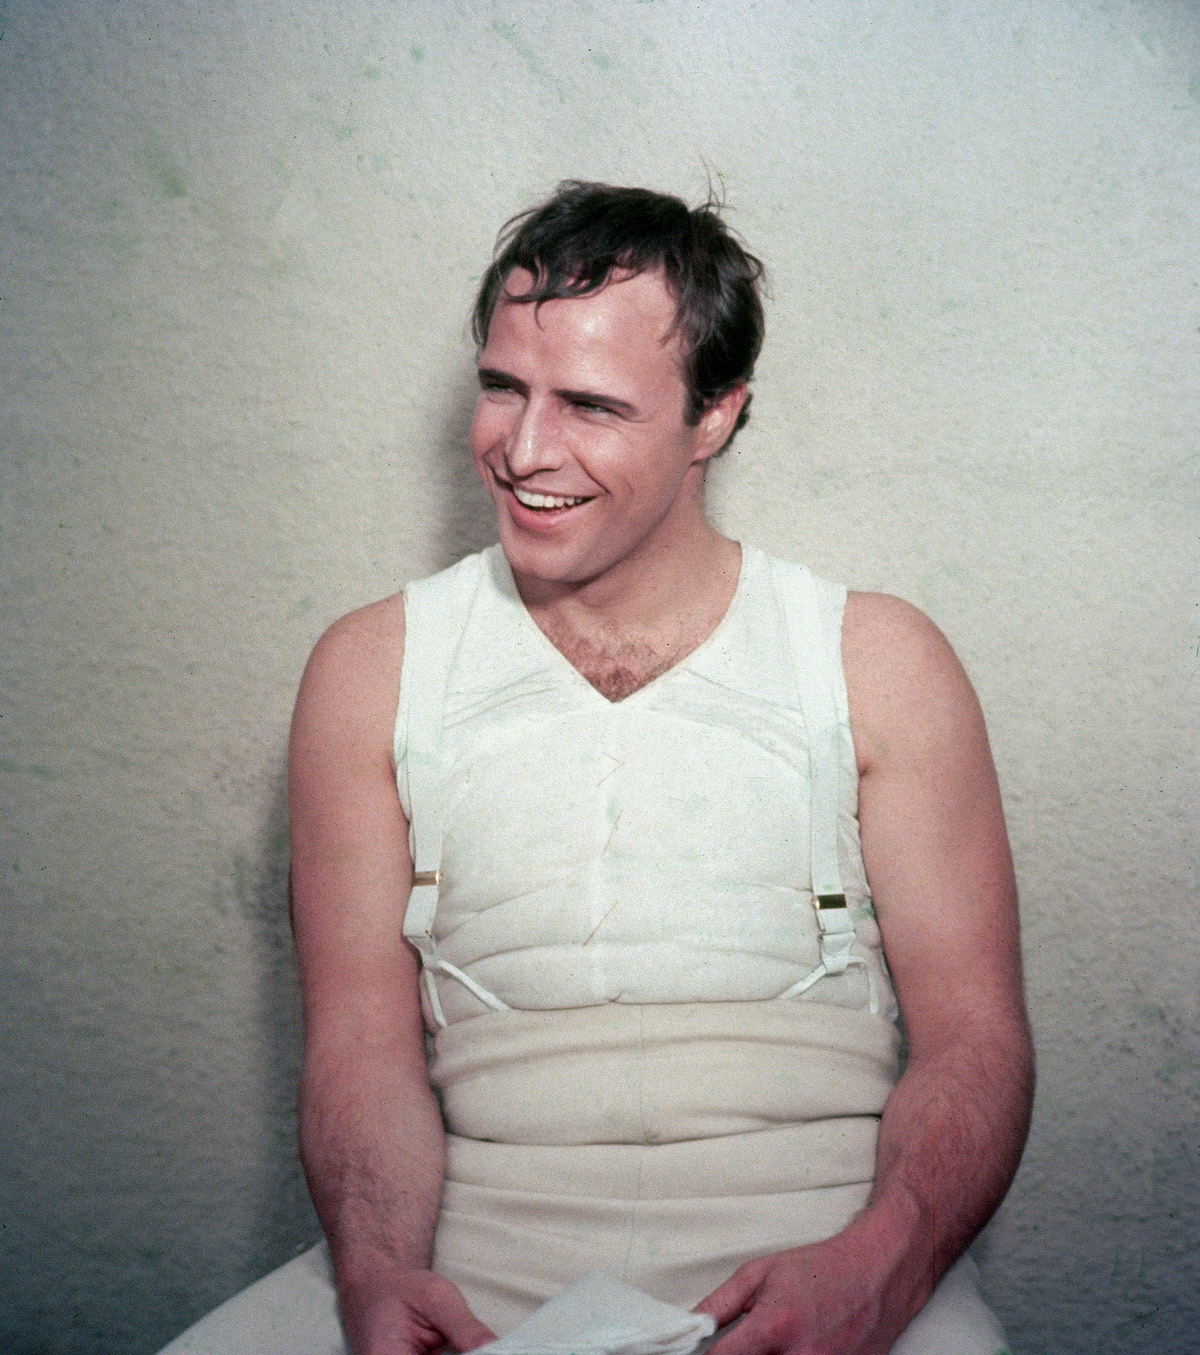 American actor Marlon Brando (1924 - 2004) laughs while wearing body padding for his role as French emperor Napoleon Bonaparte in the film, 'Desiree,' directed by Henry Koster, 1954 | Hulton Archive/Getty Images